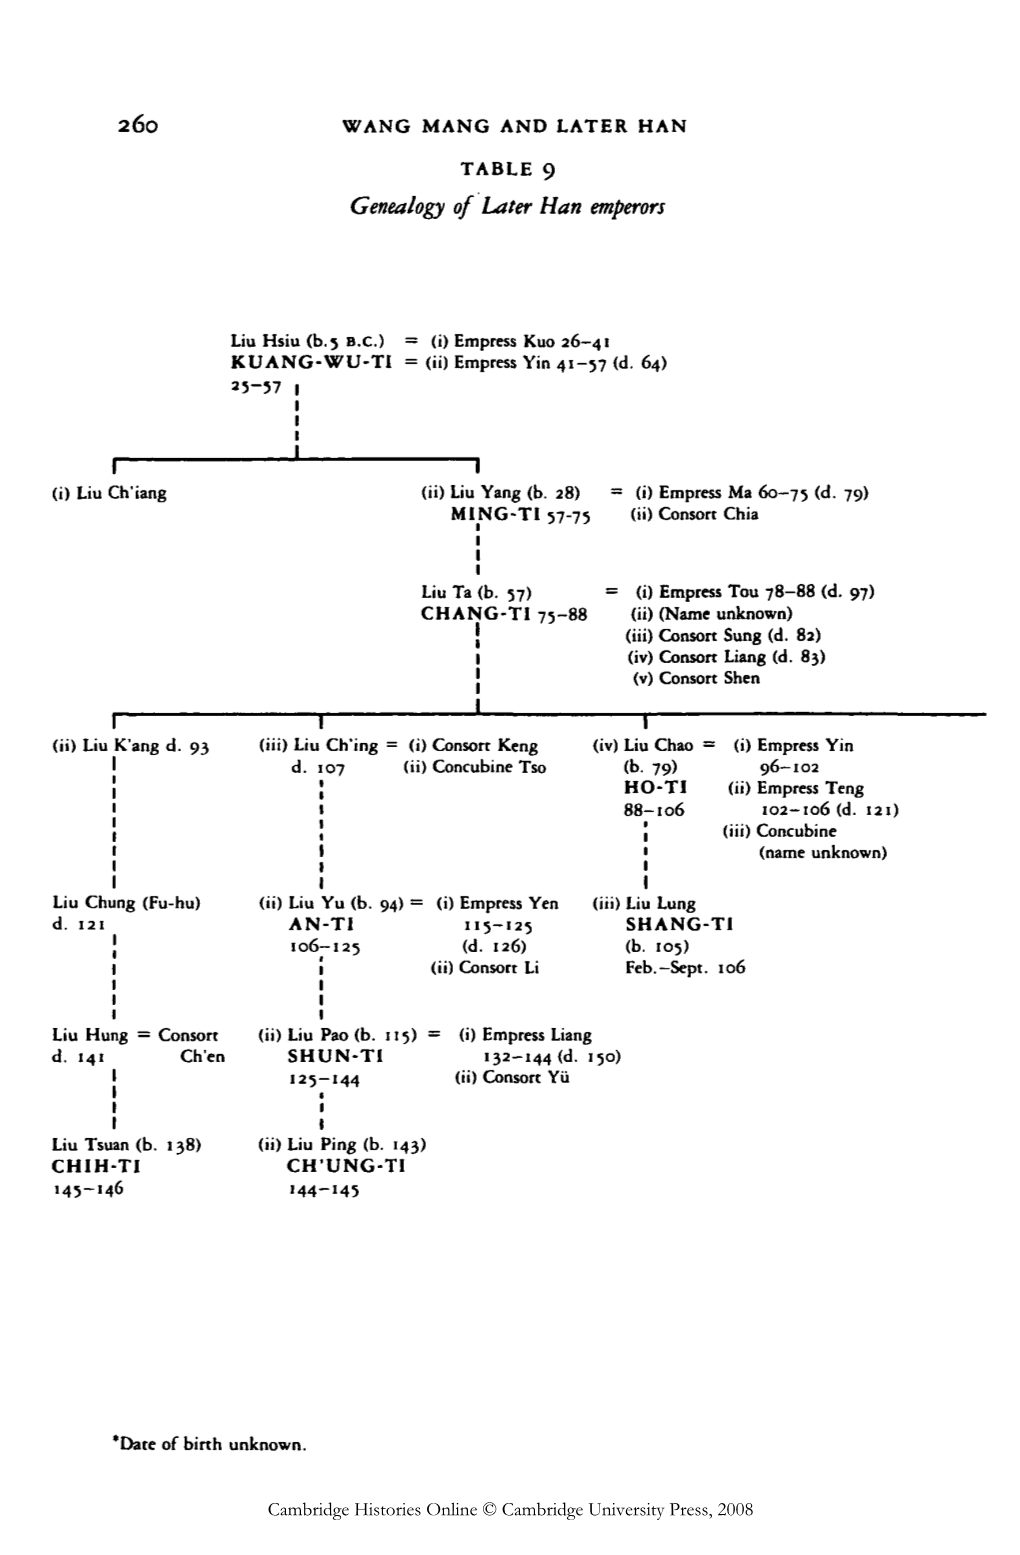 Genealogy of Later Han Emperors